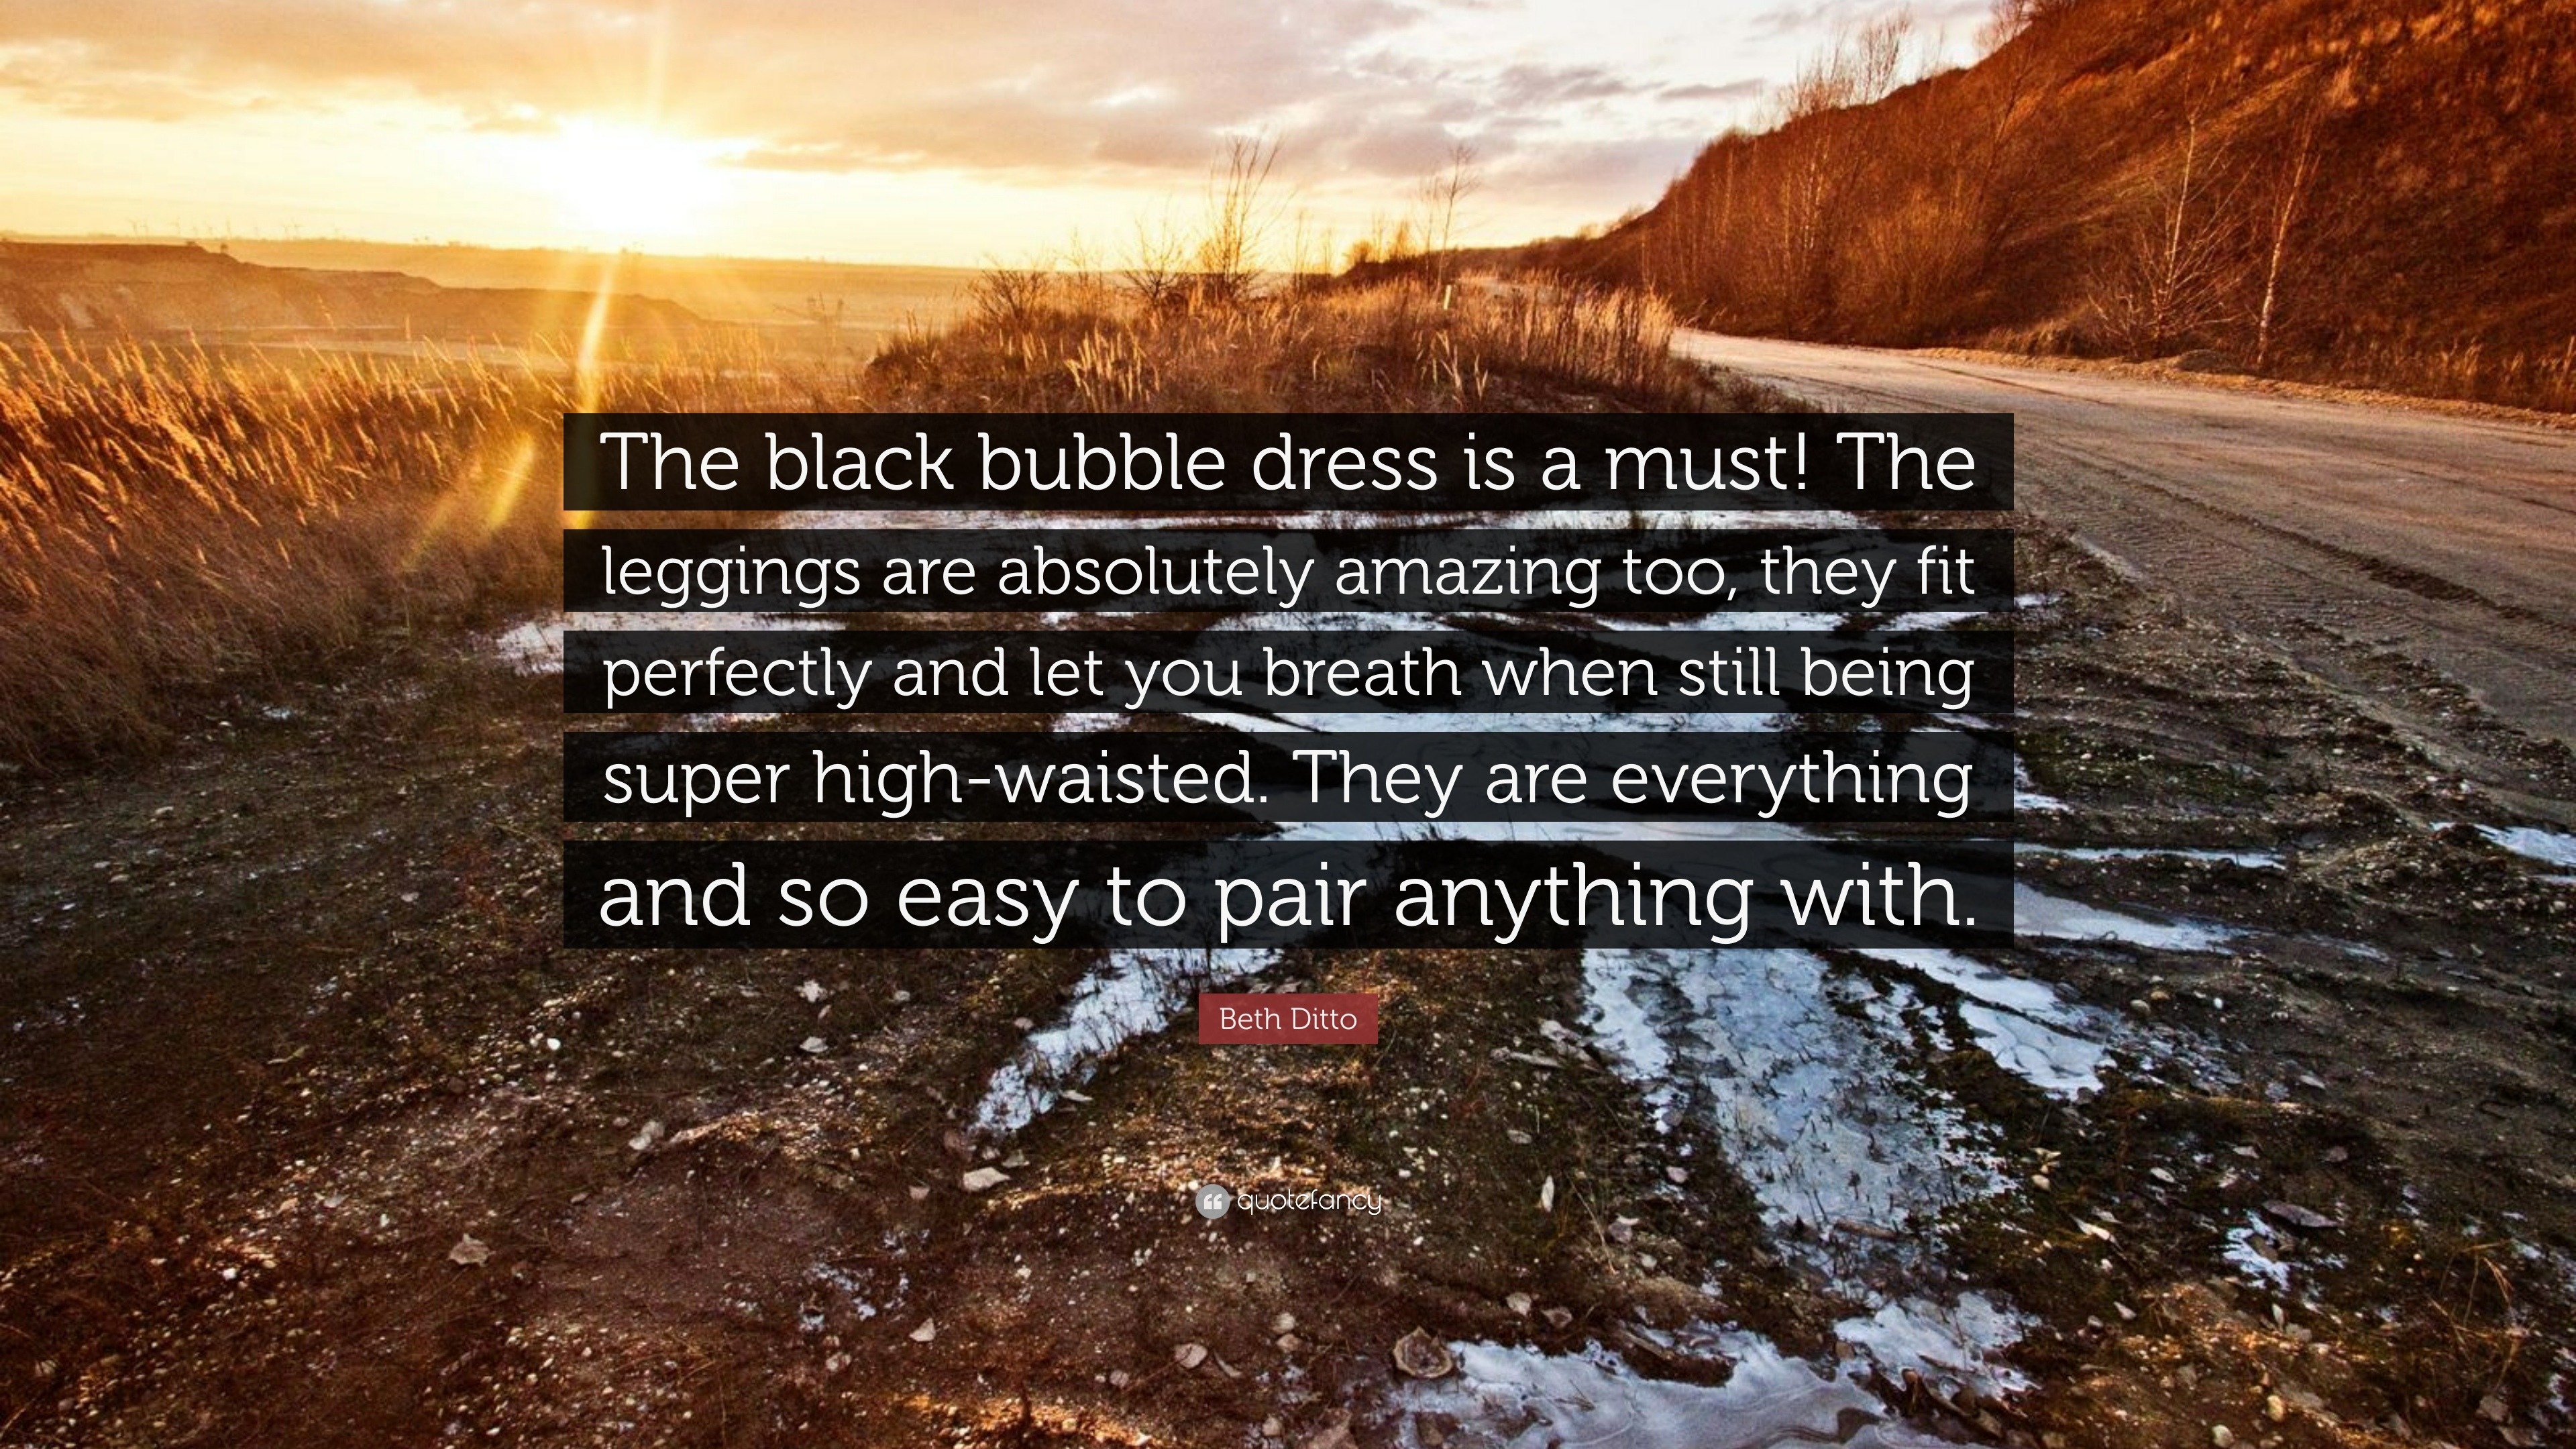 https://quotefancy.com/media/wallpaper/3840x2160/615207-Beth-Ditto-Quote-The-black-bubble-dress-is-a-must-The-leggings-are.jpg